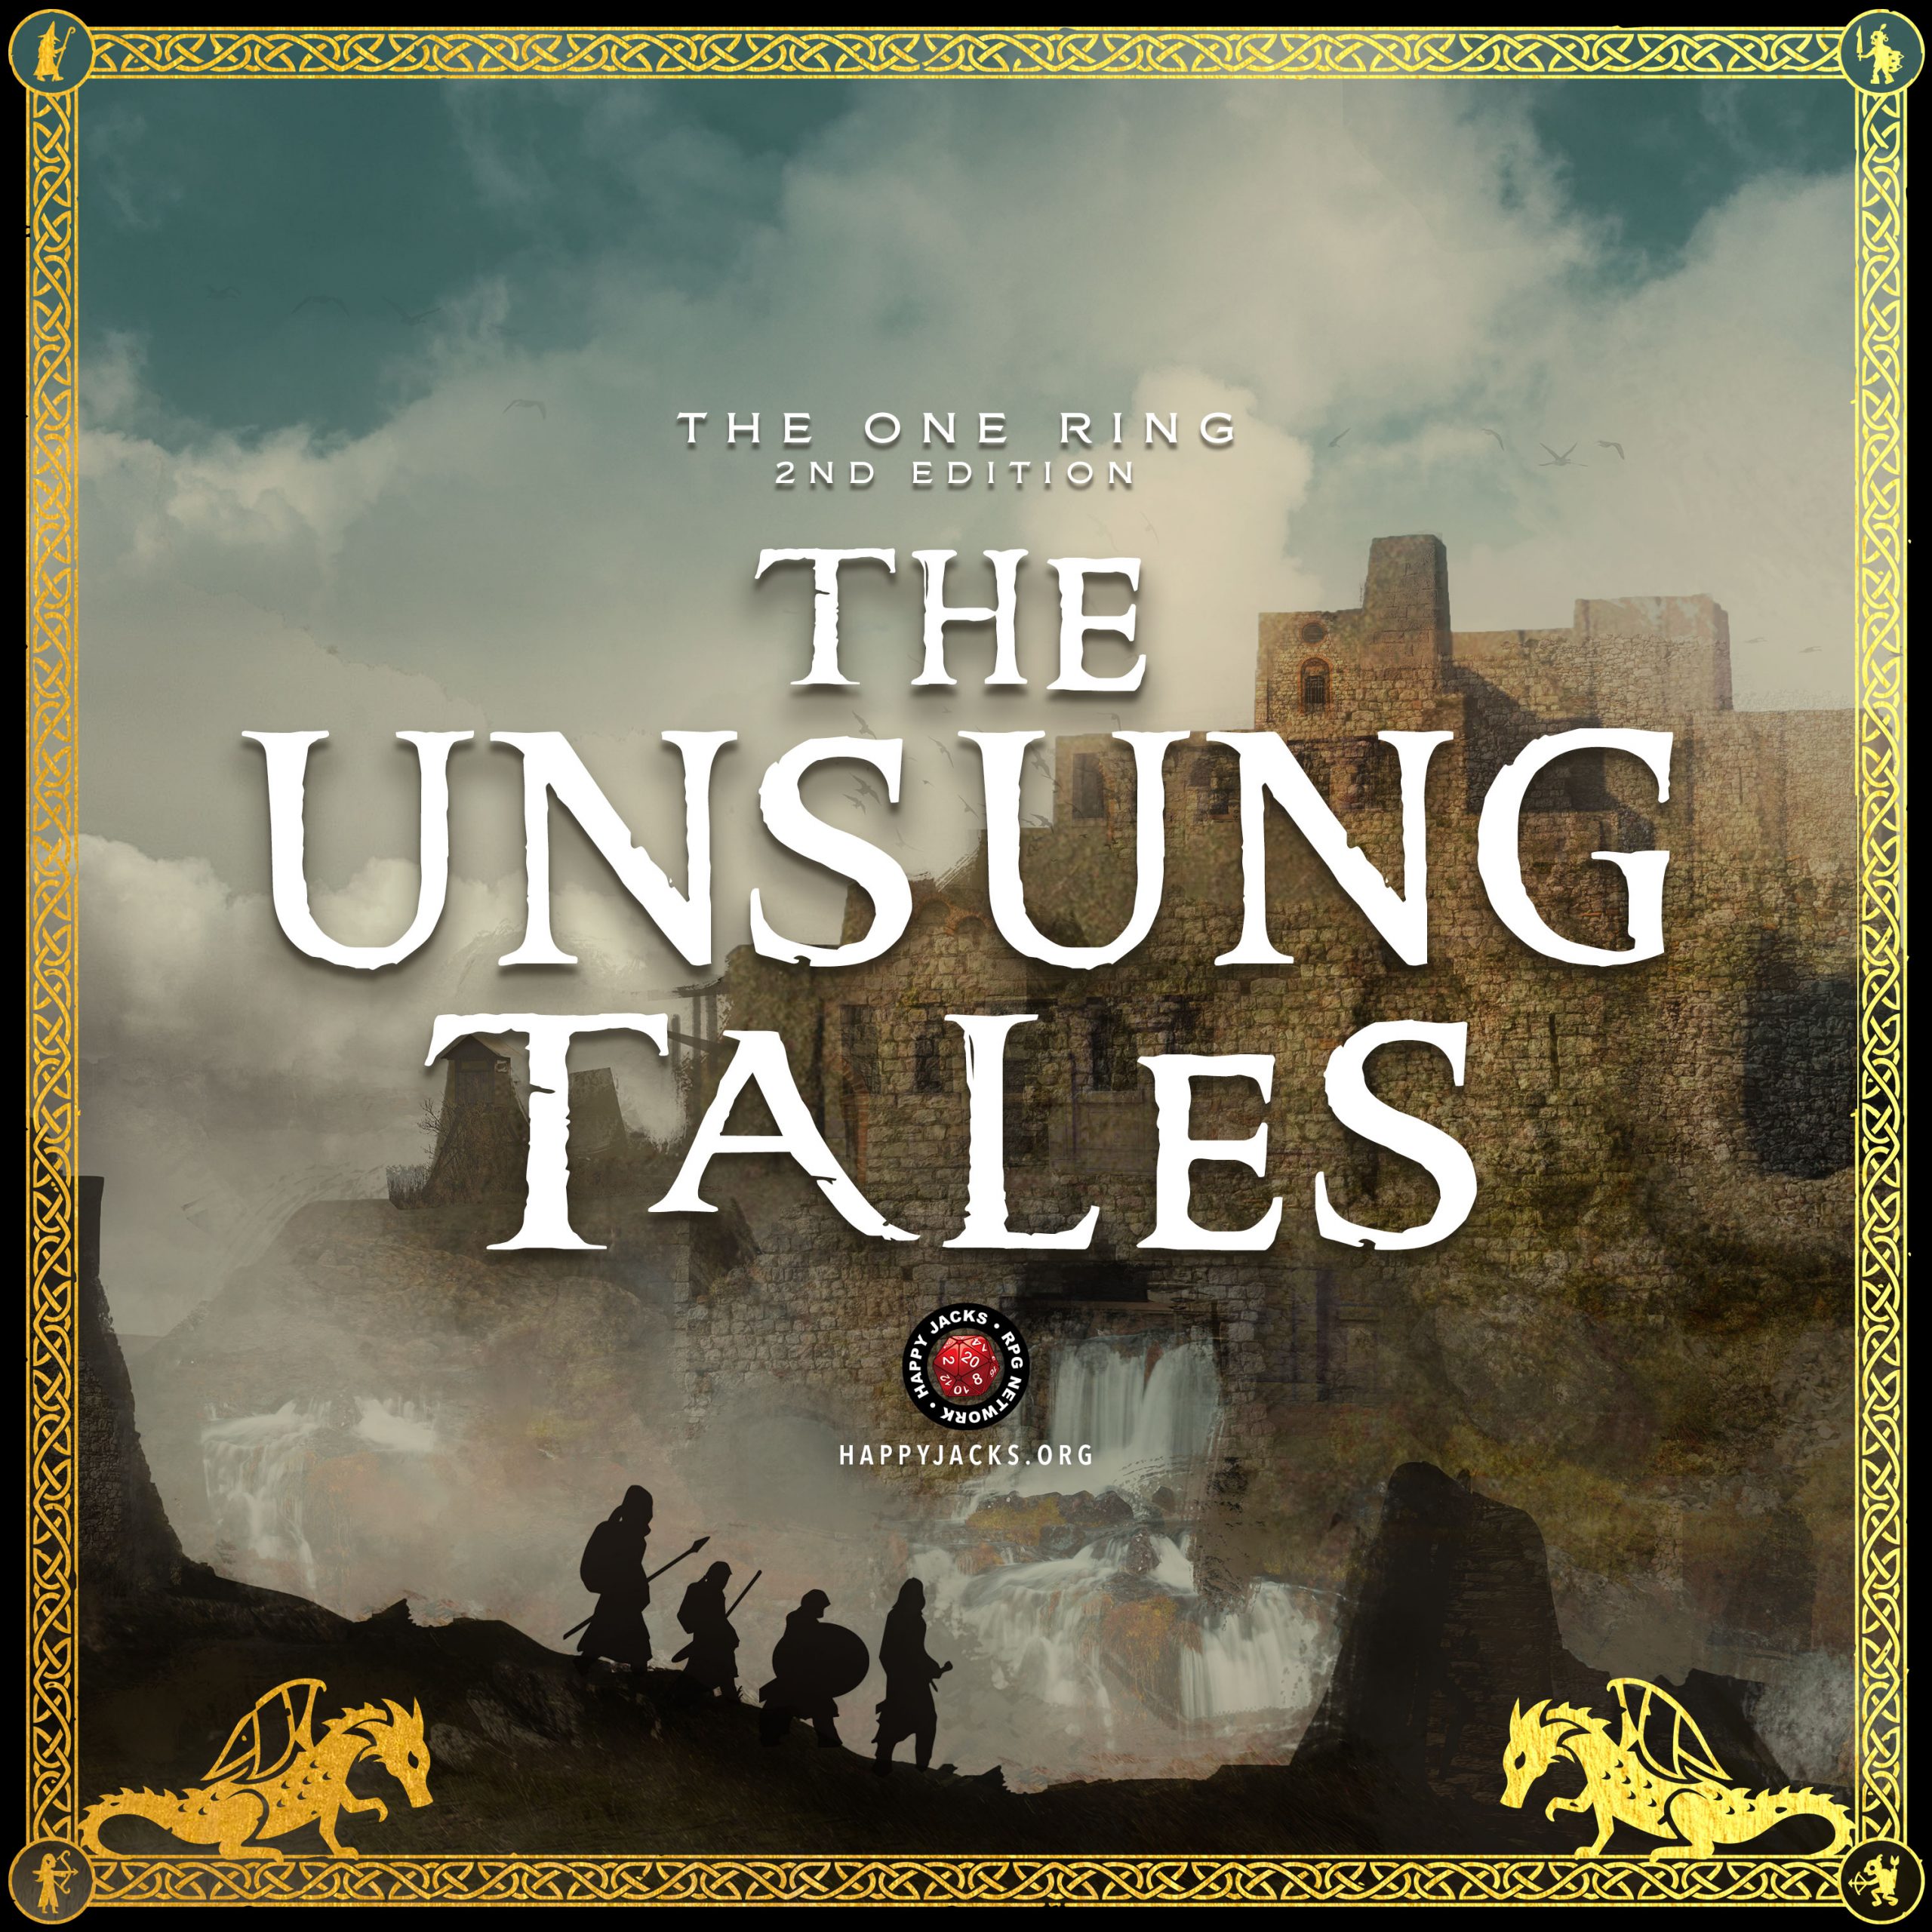 UNSUNG02 Creek’s Crossing | The Unsung Tales | The One Ring 2e